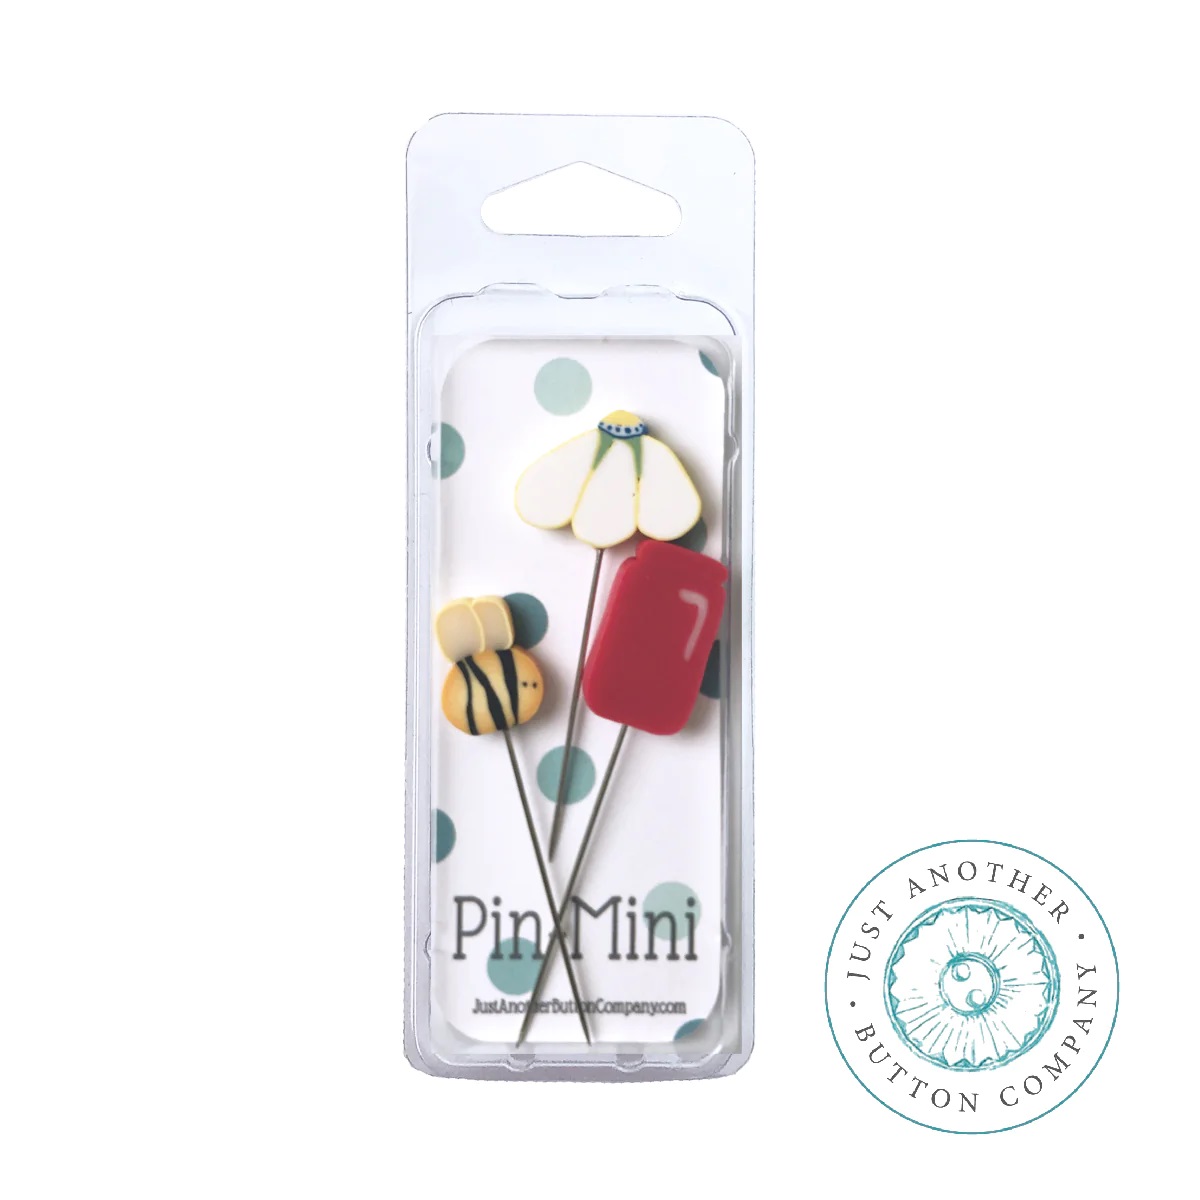 jpm464 Daisy Jar : Pin-Mini :  by Just Another Button Company  